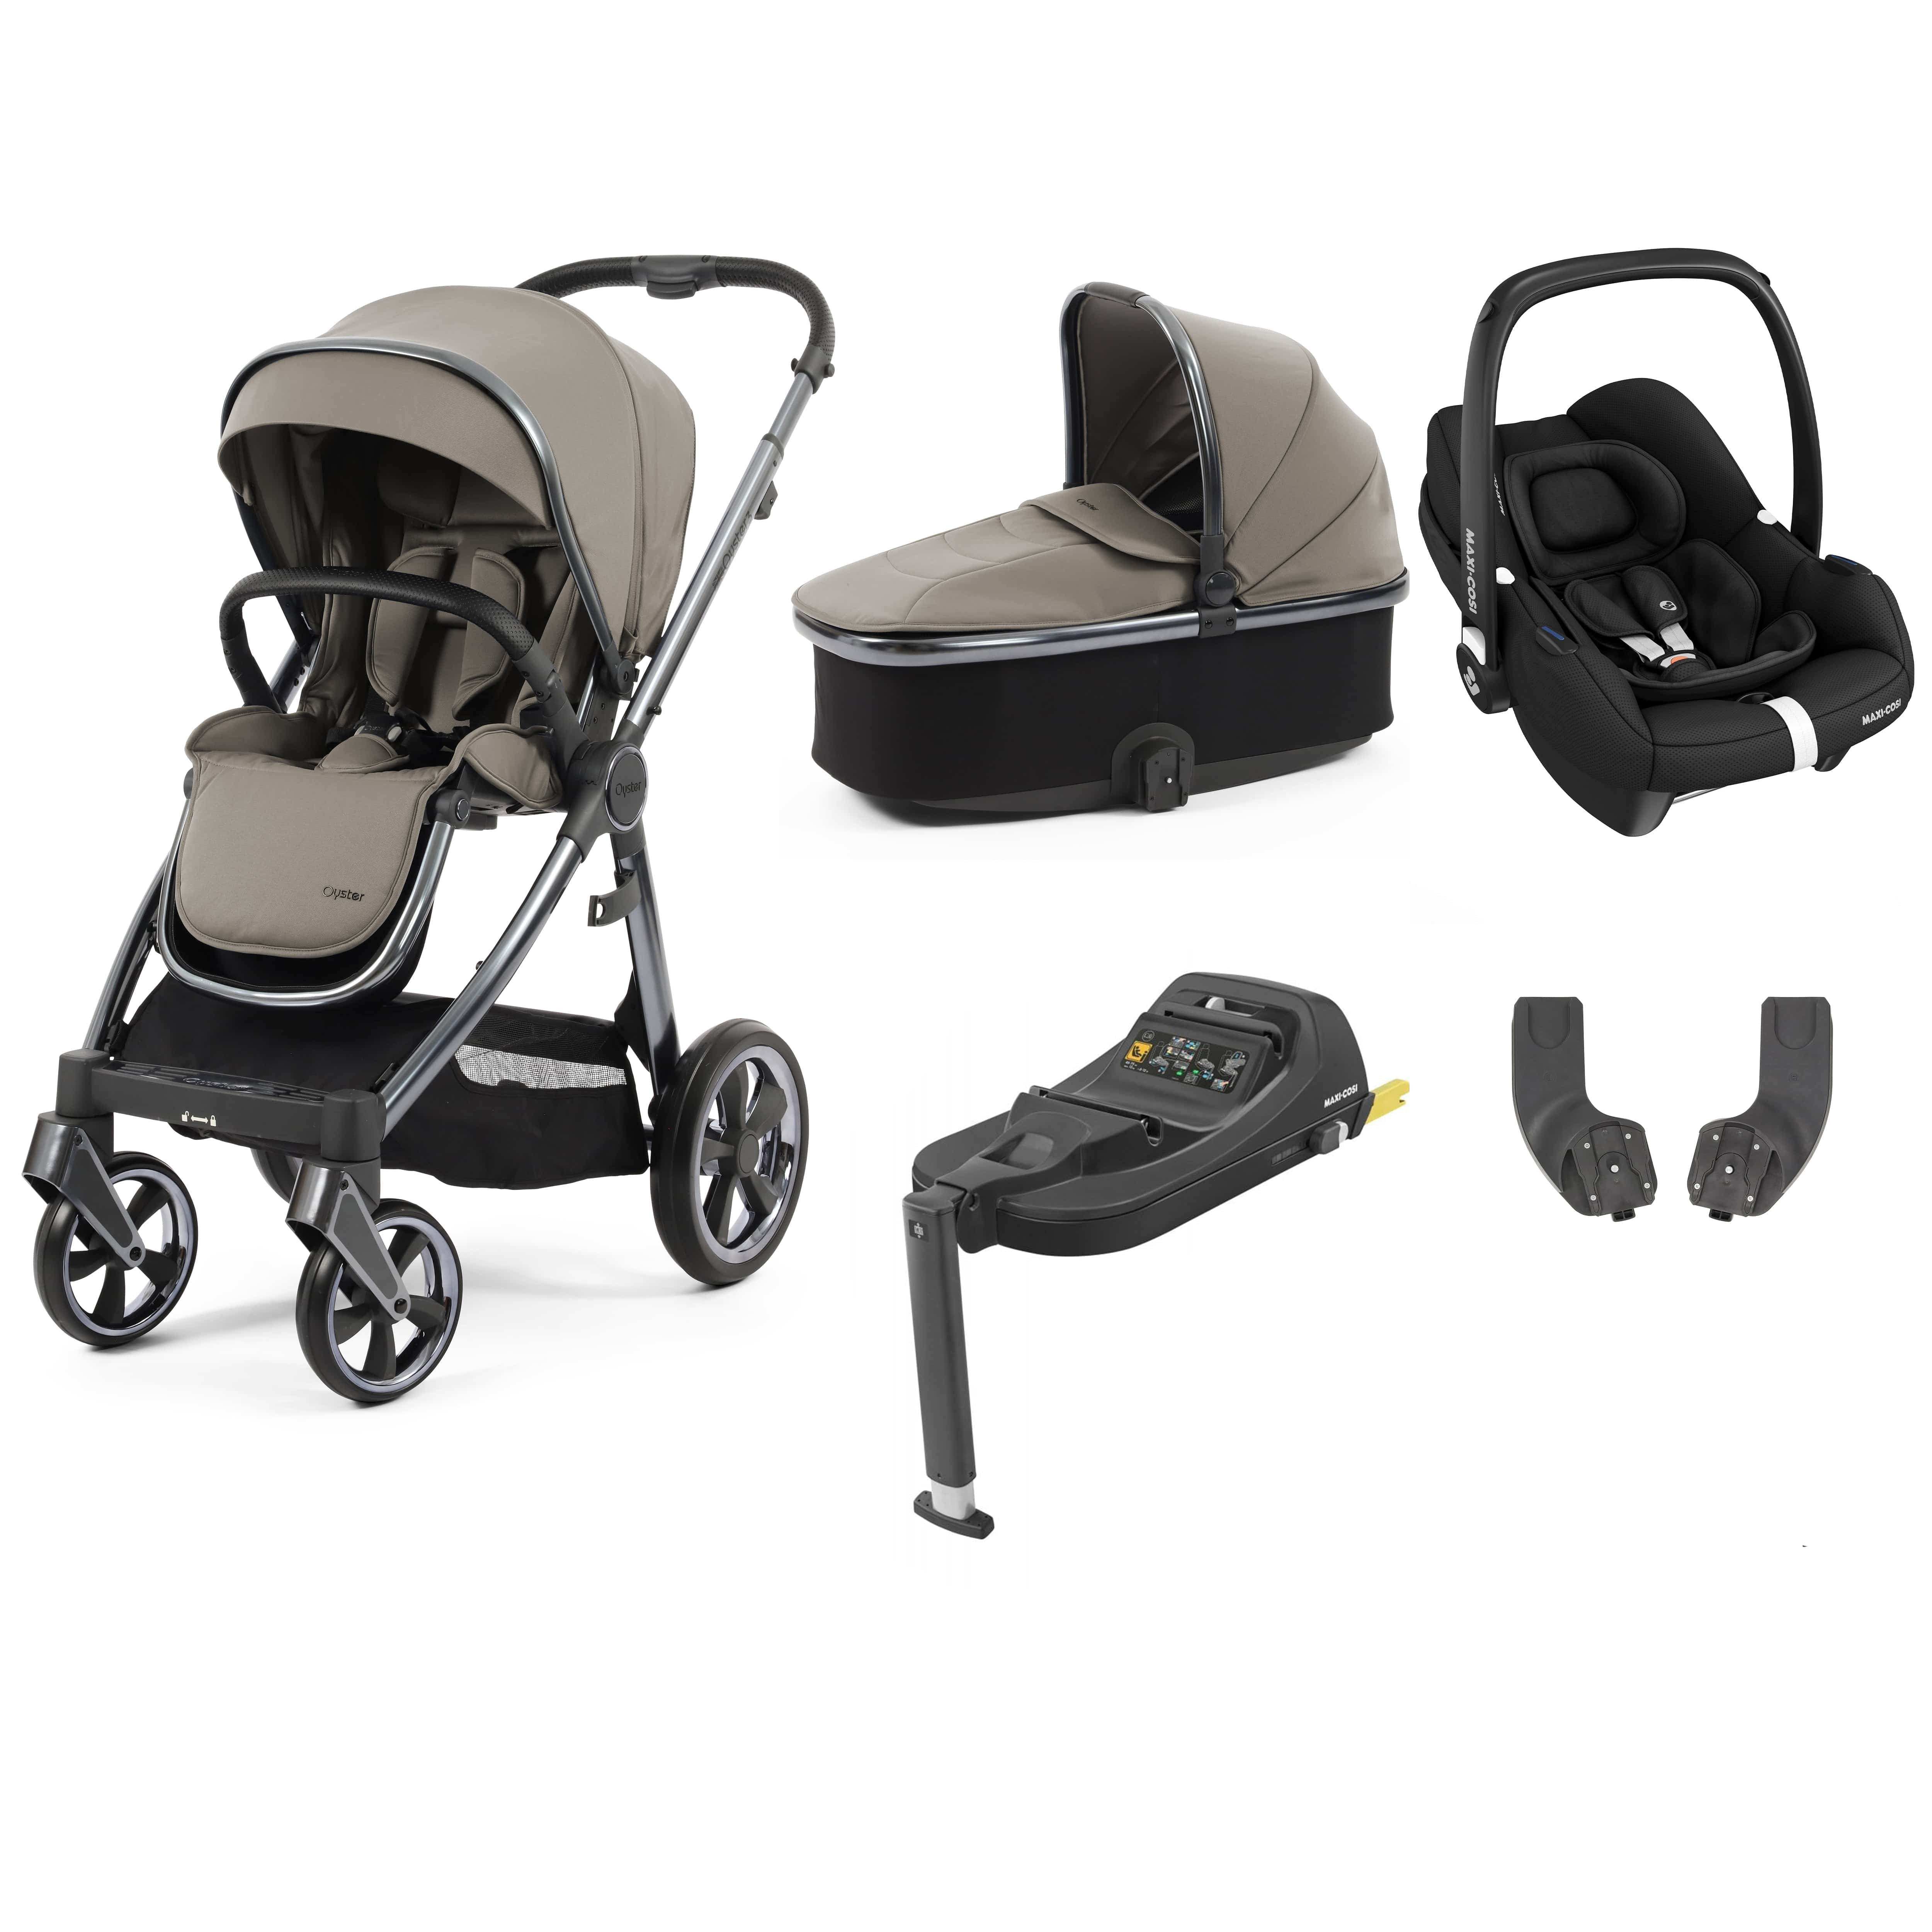 BabyStyle travel systems Babystyle Oyster 3 Essential Bundle with Car Seat - Stone 14768-STN